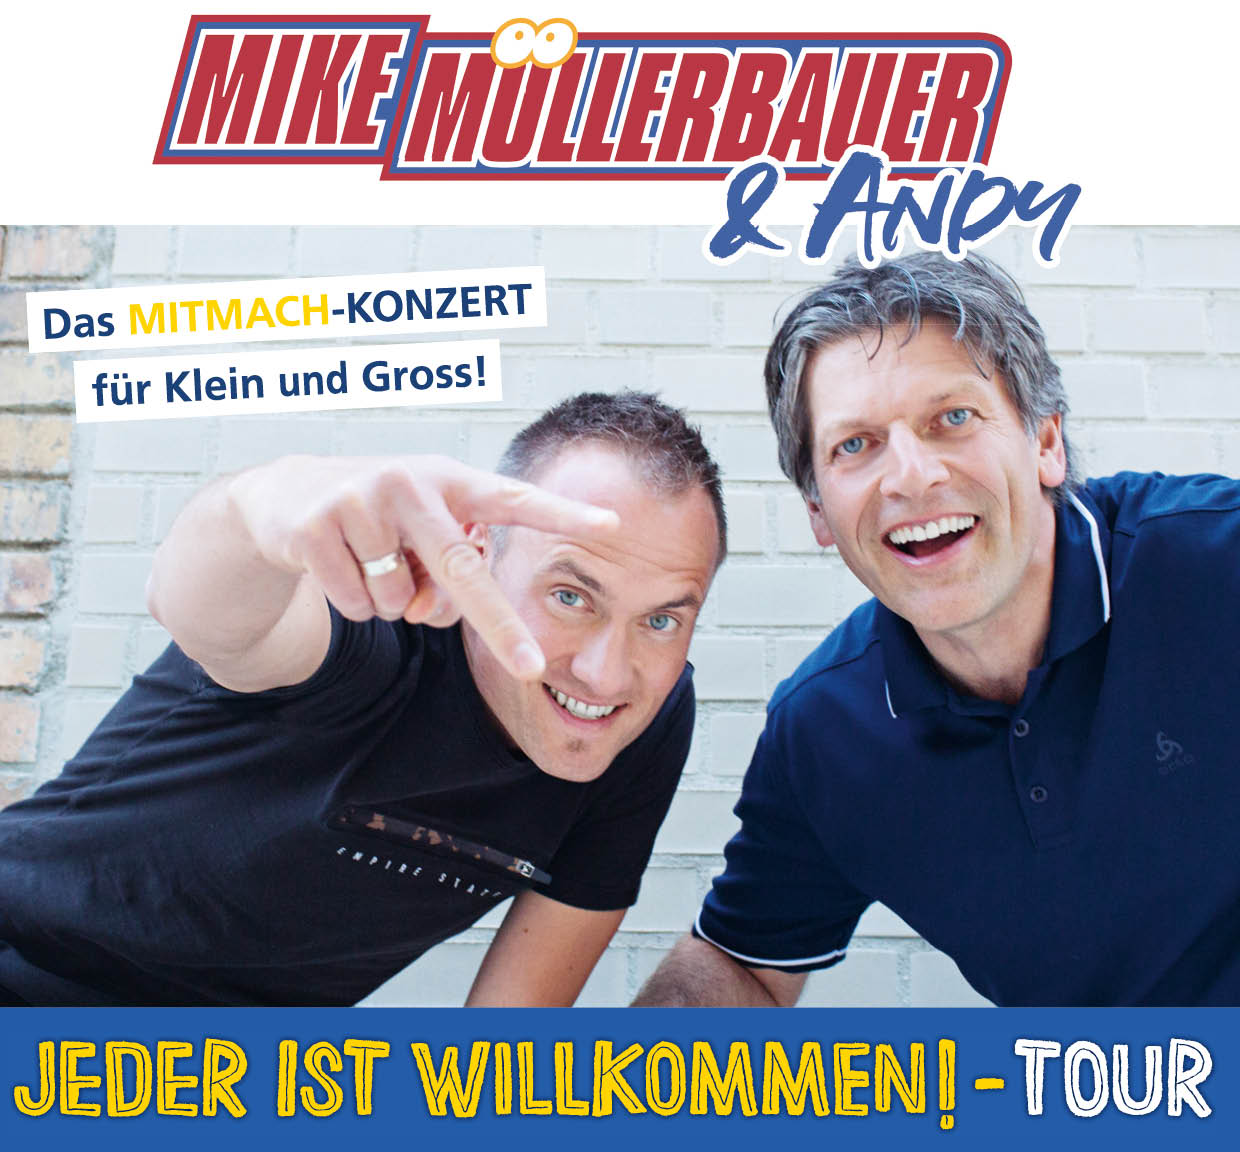 You are currently viewing Konzert mit Mike Müllerbauer